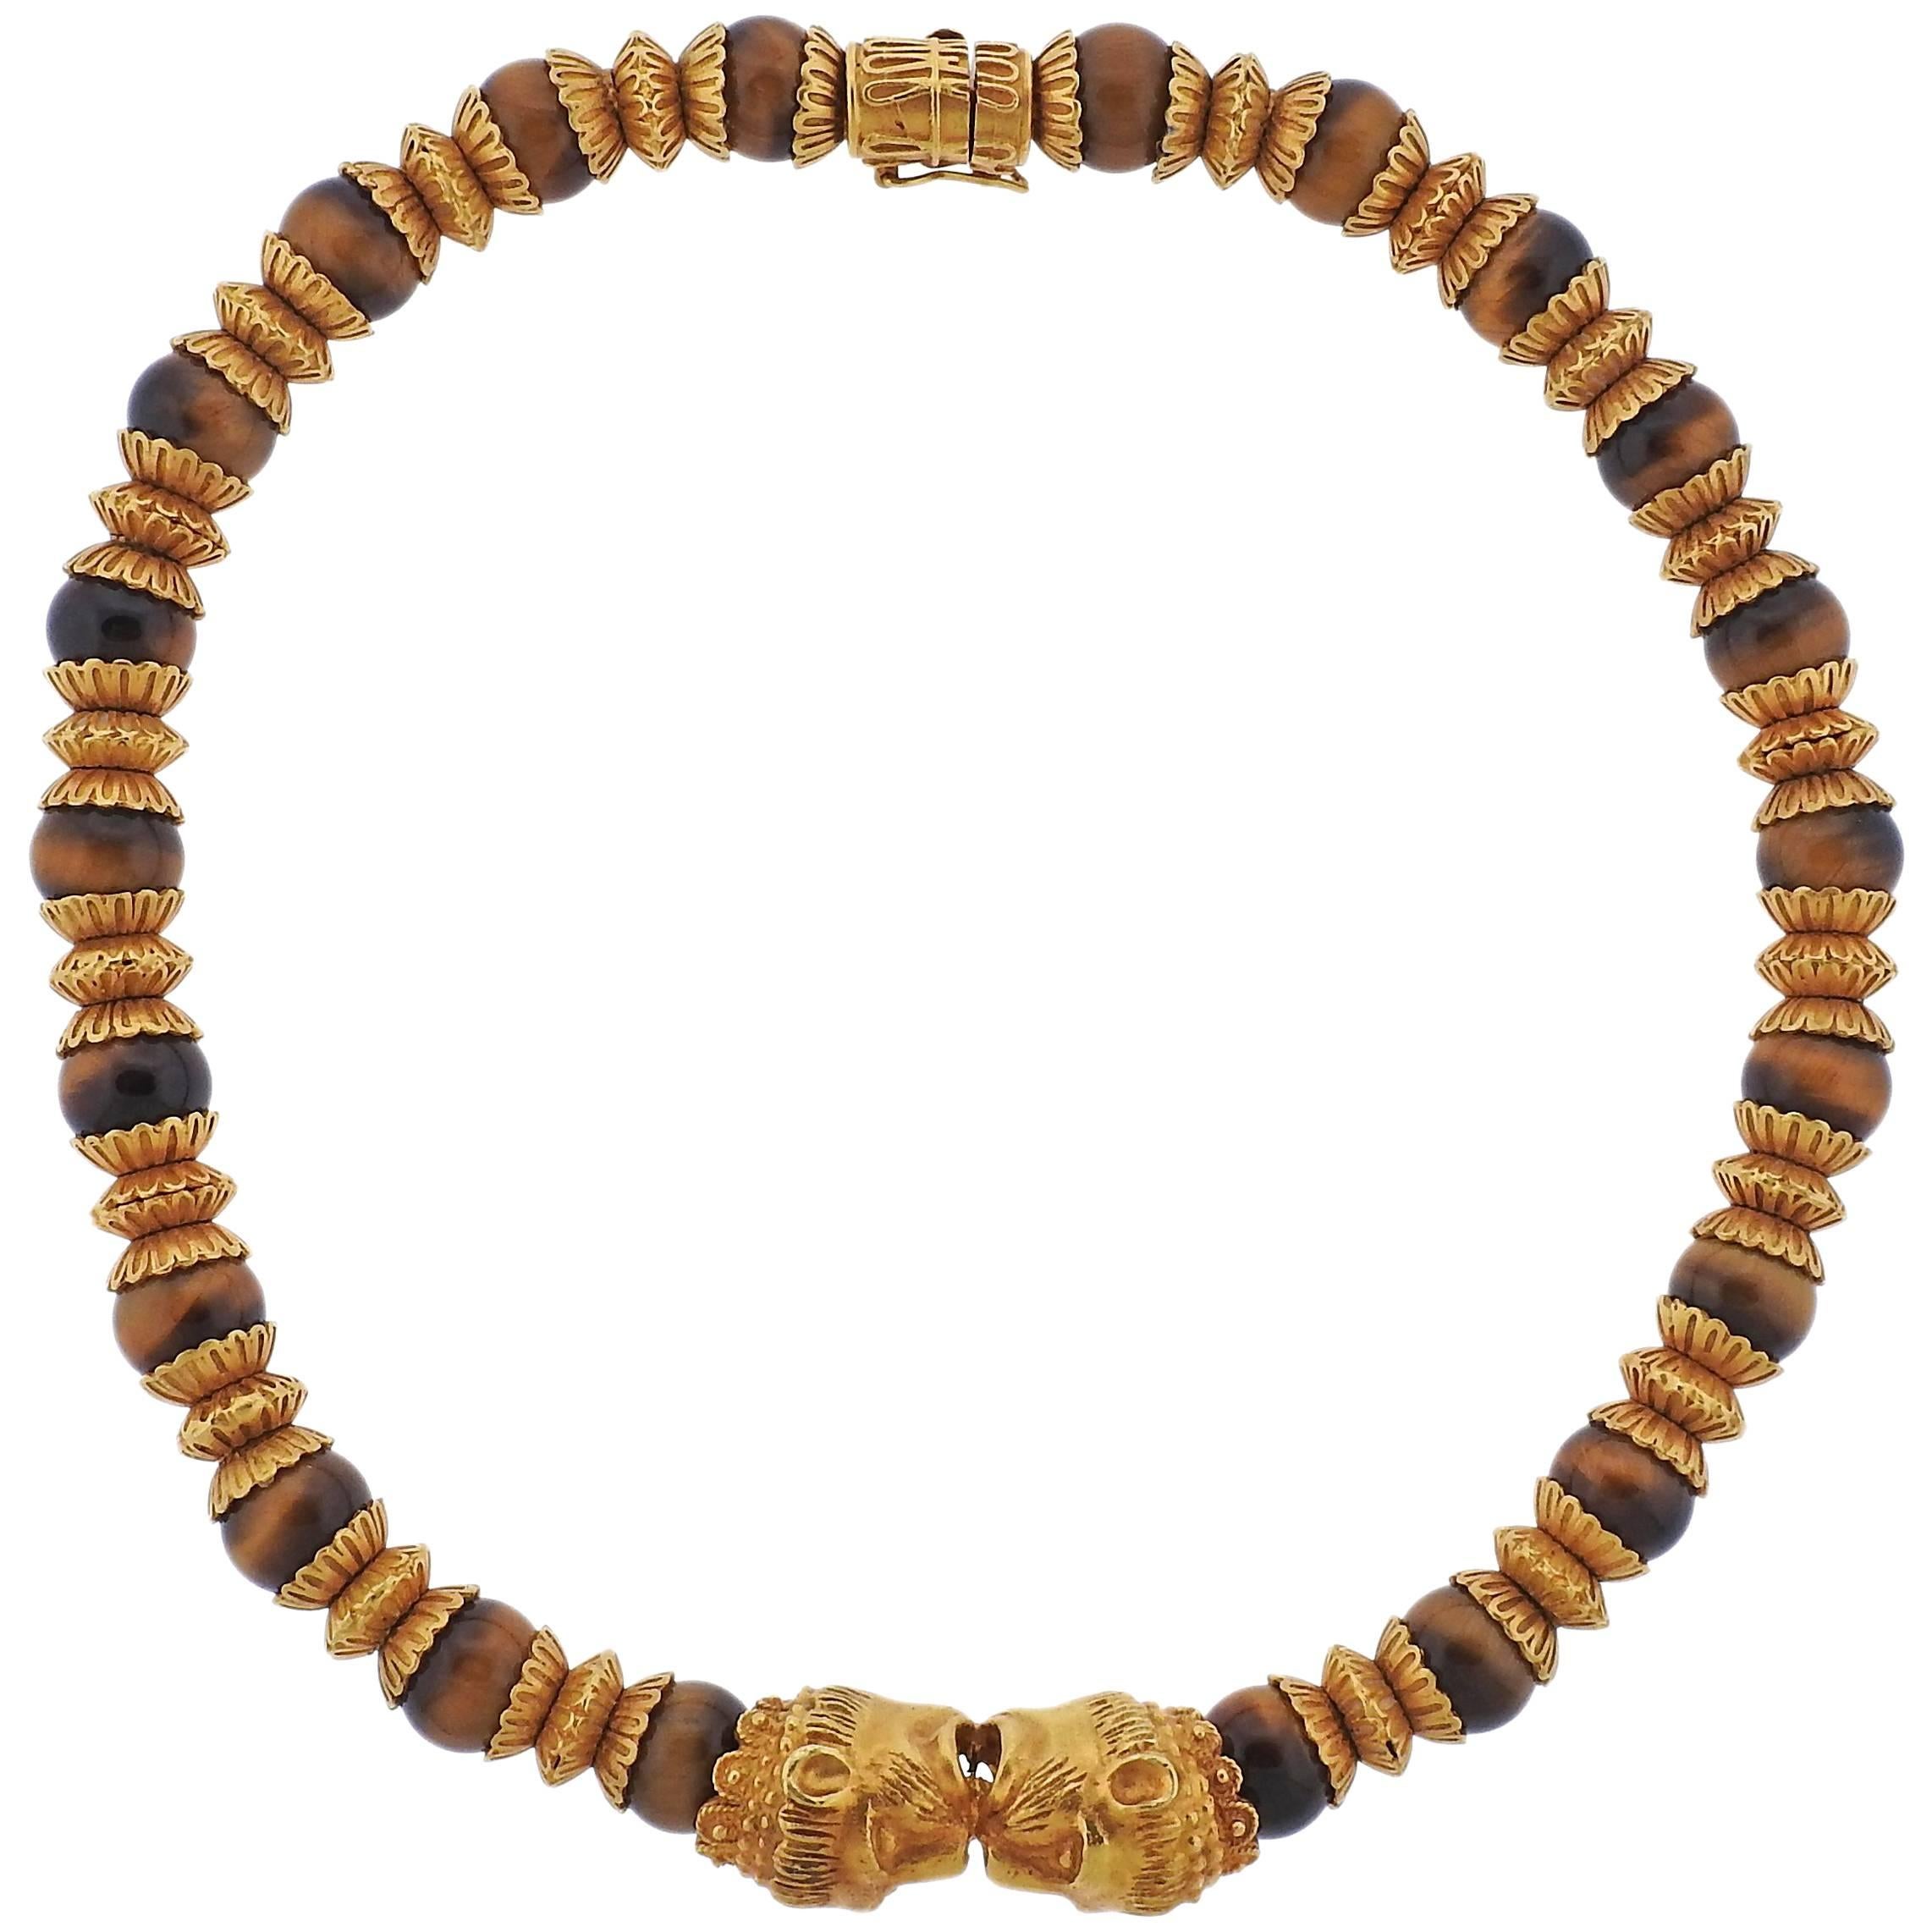 Massive Lalaounis Greece Tiger's Eye Bead Gold Necklace